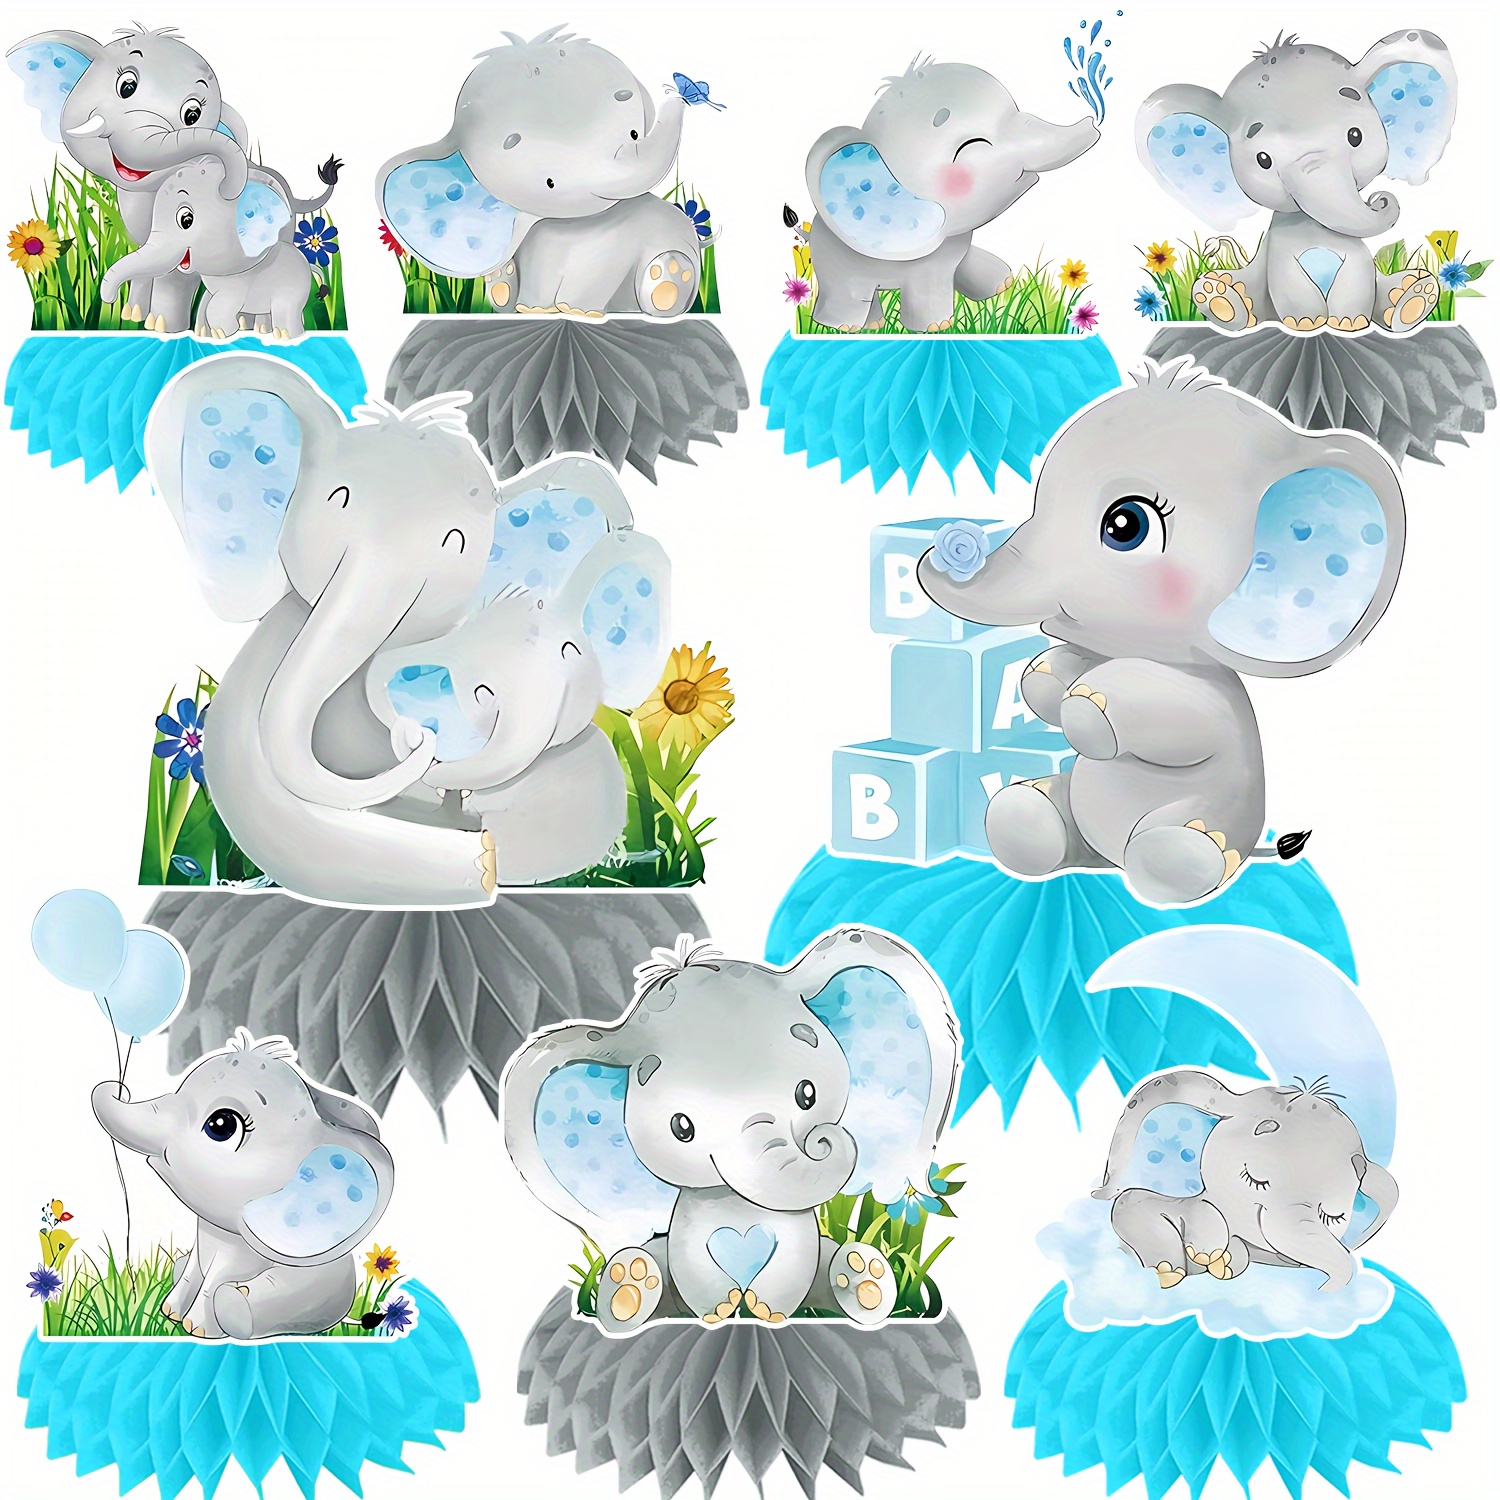 

Blue Elephant Honeycomb Centerpieces - 9pcs Set For Baby Shower And Birthday Party Decorations, Paper Table Toppers With Floral Accents, Themed Party Supplies For All Occasions, No Electricity Needed